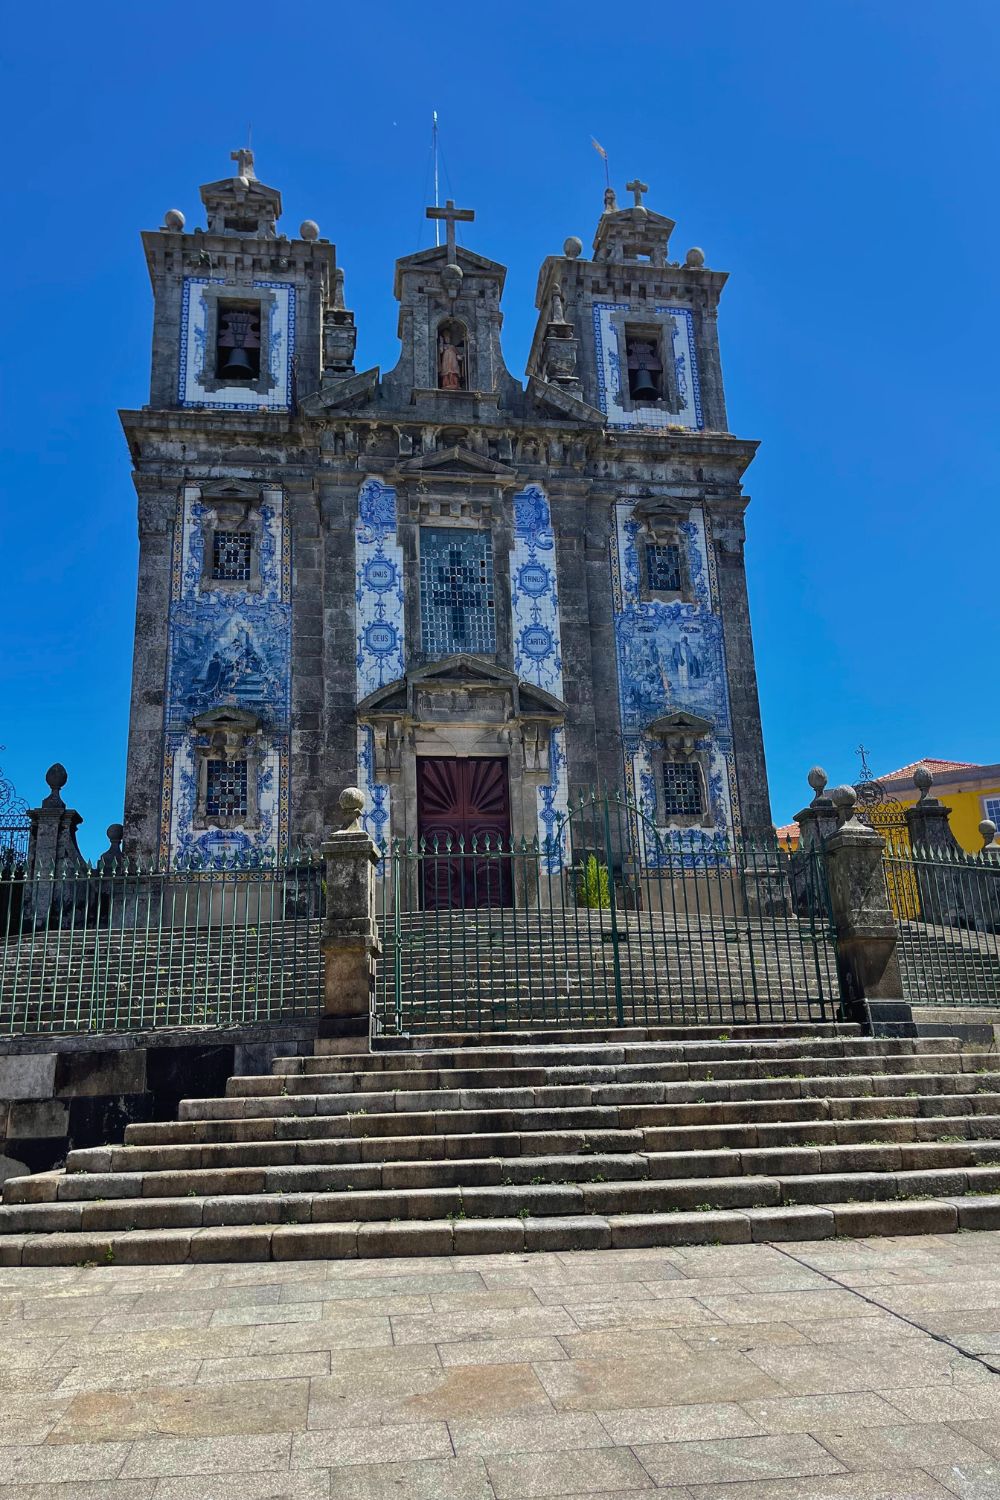 The iconic blue and white azulejo tiles adorn the facade of the historic Church in Porto, set against a clear blue sky, showcasing Portugal's traditional ceramic craftsmanship.